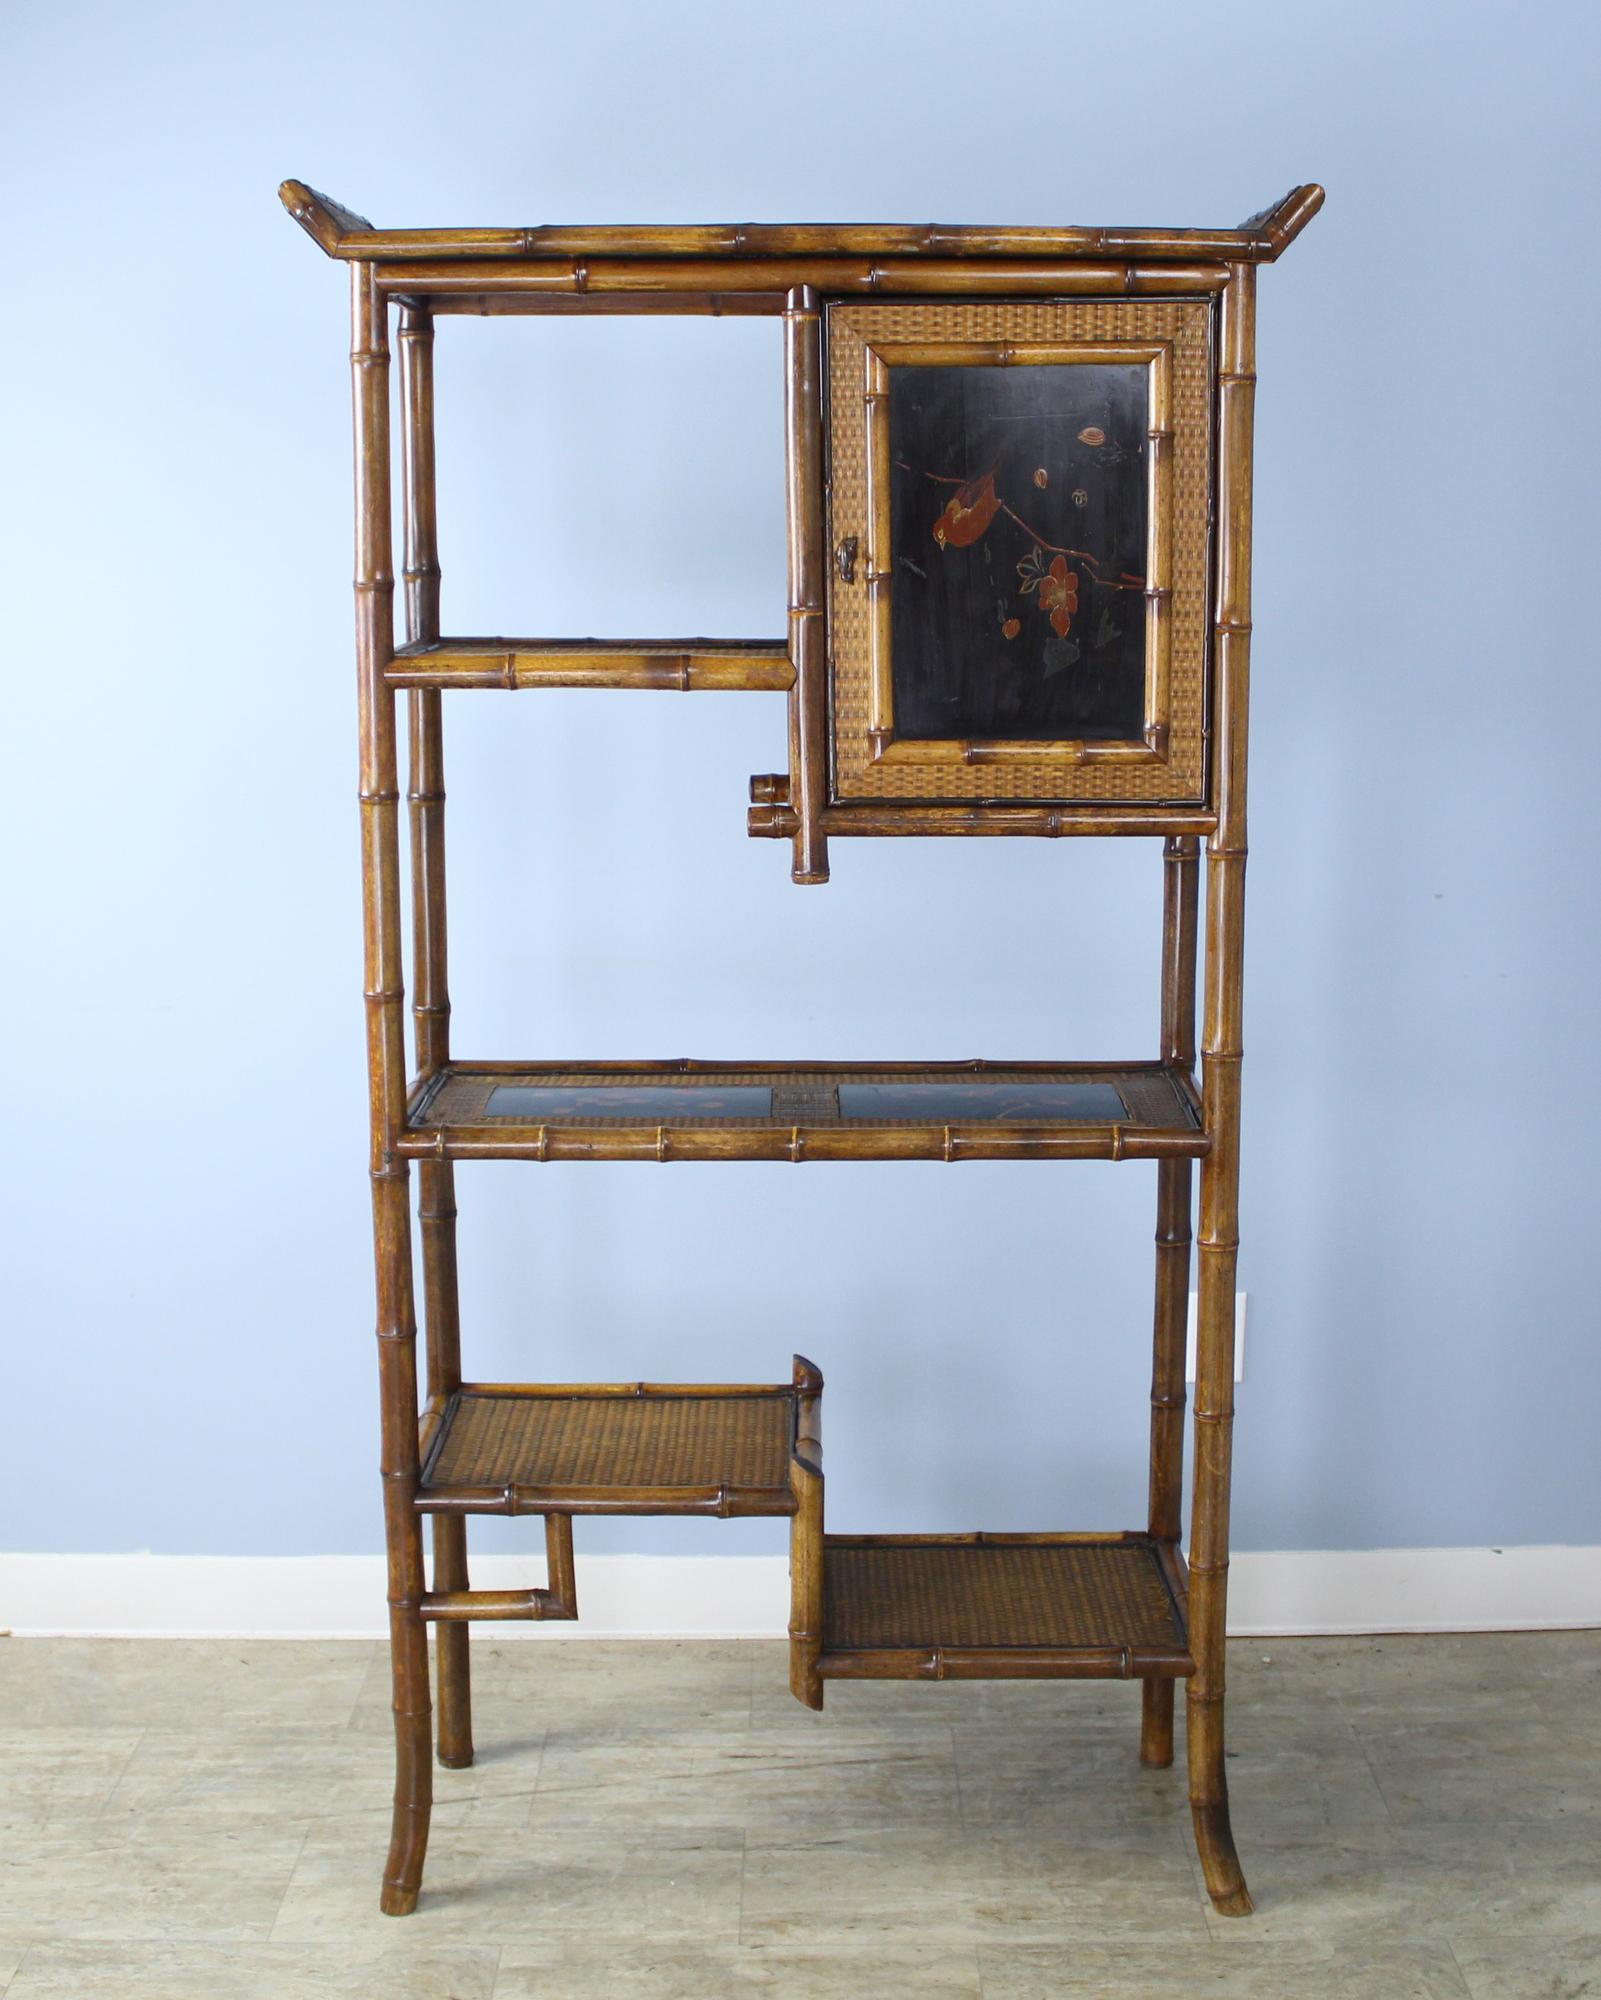 A highly decorative and unusual bamboo bookcase with a small cupboard. We love the black lacquered chinoiserie deign on the center shelf, and the subtle pattern woven into the rush on the sides.